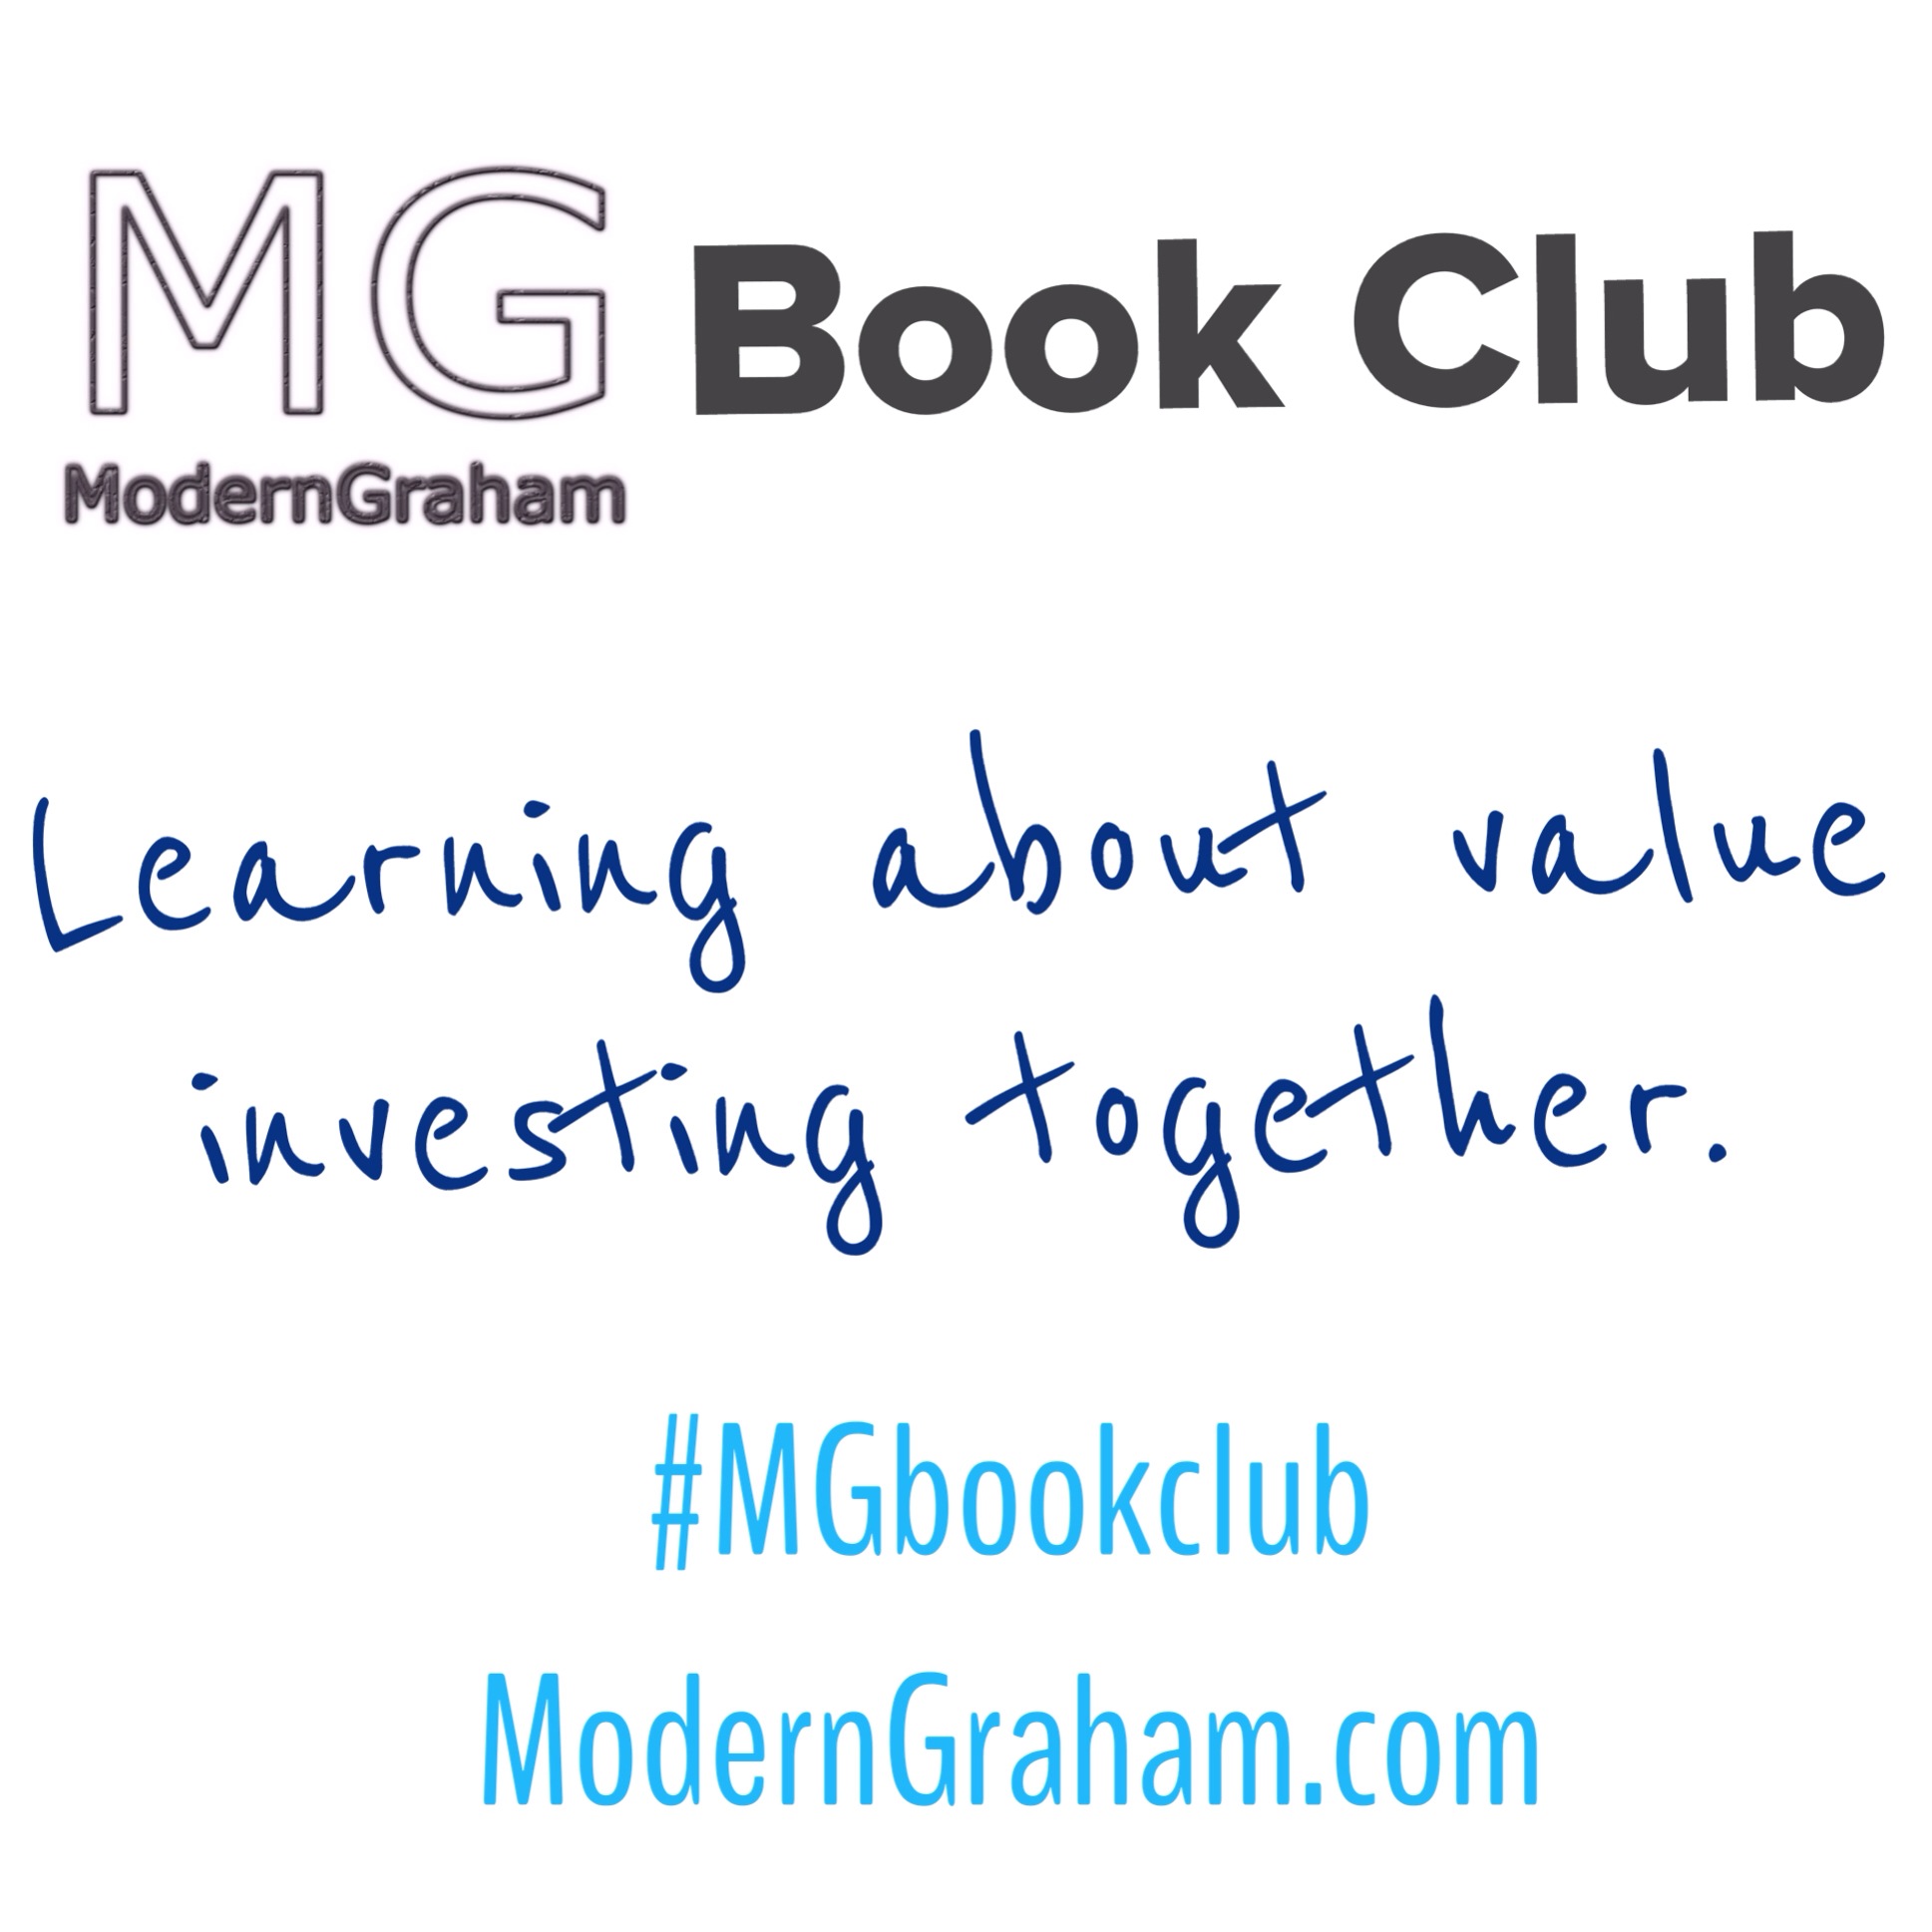 A Comparison of Four Listed Companies ($AMZN, $INTC, $NFLX, and $WFC) (MG Book Club Chapter 13)